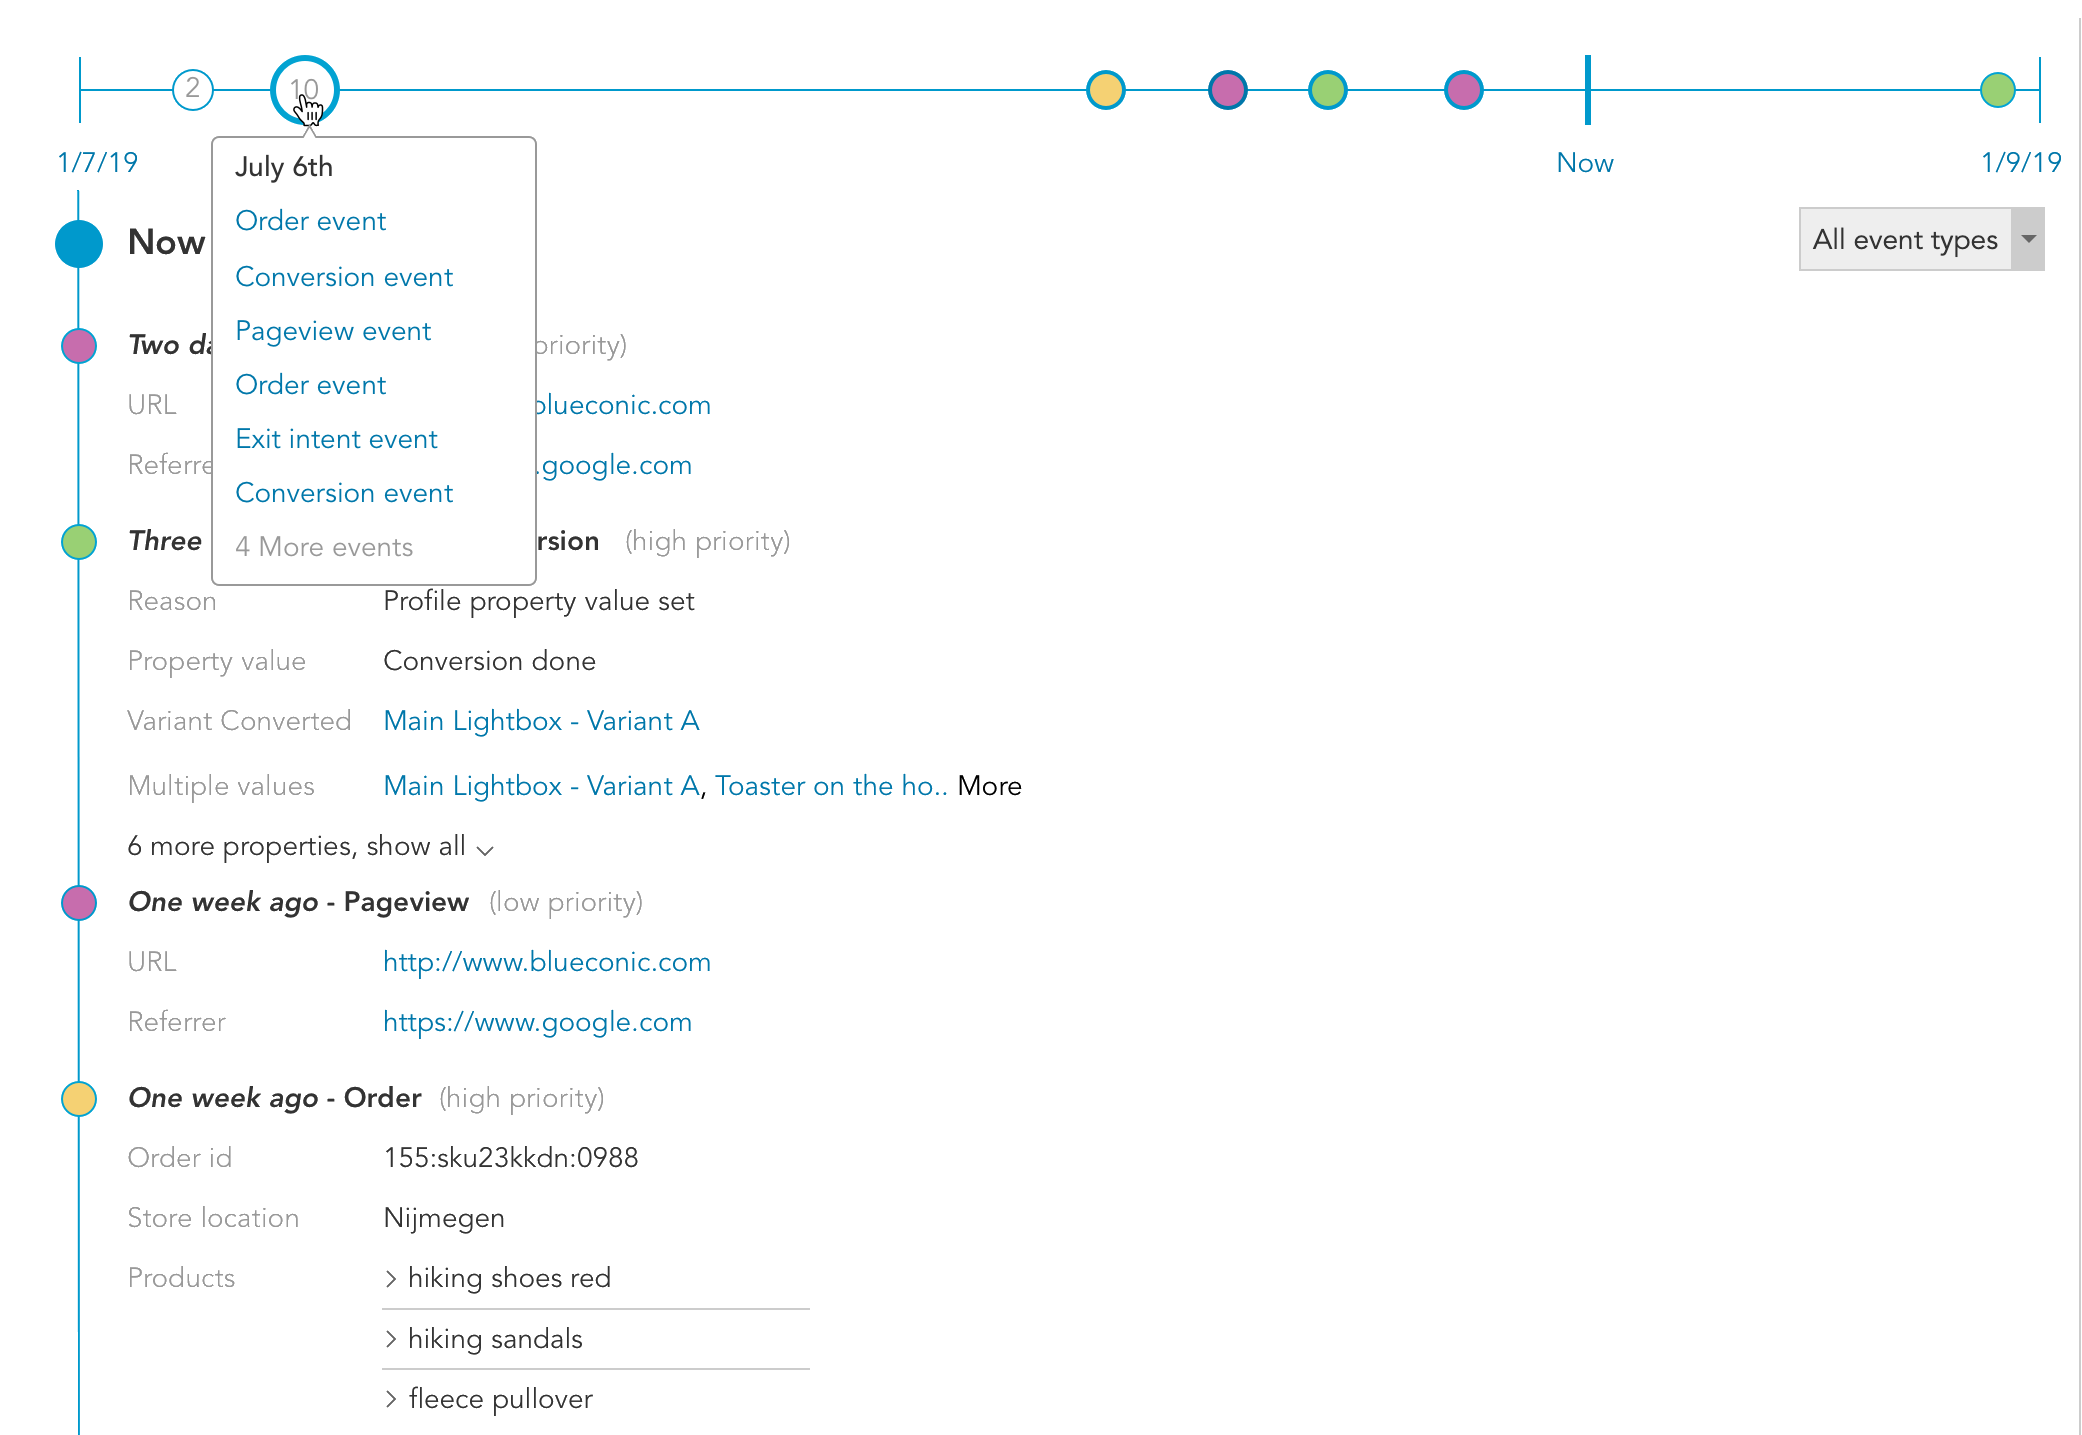 How are events stored in the BlueConic CDP using timeline events and profile properties?